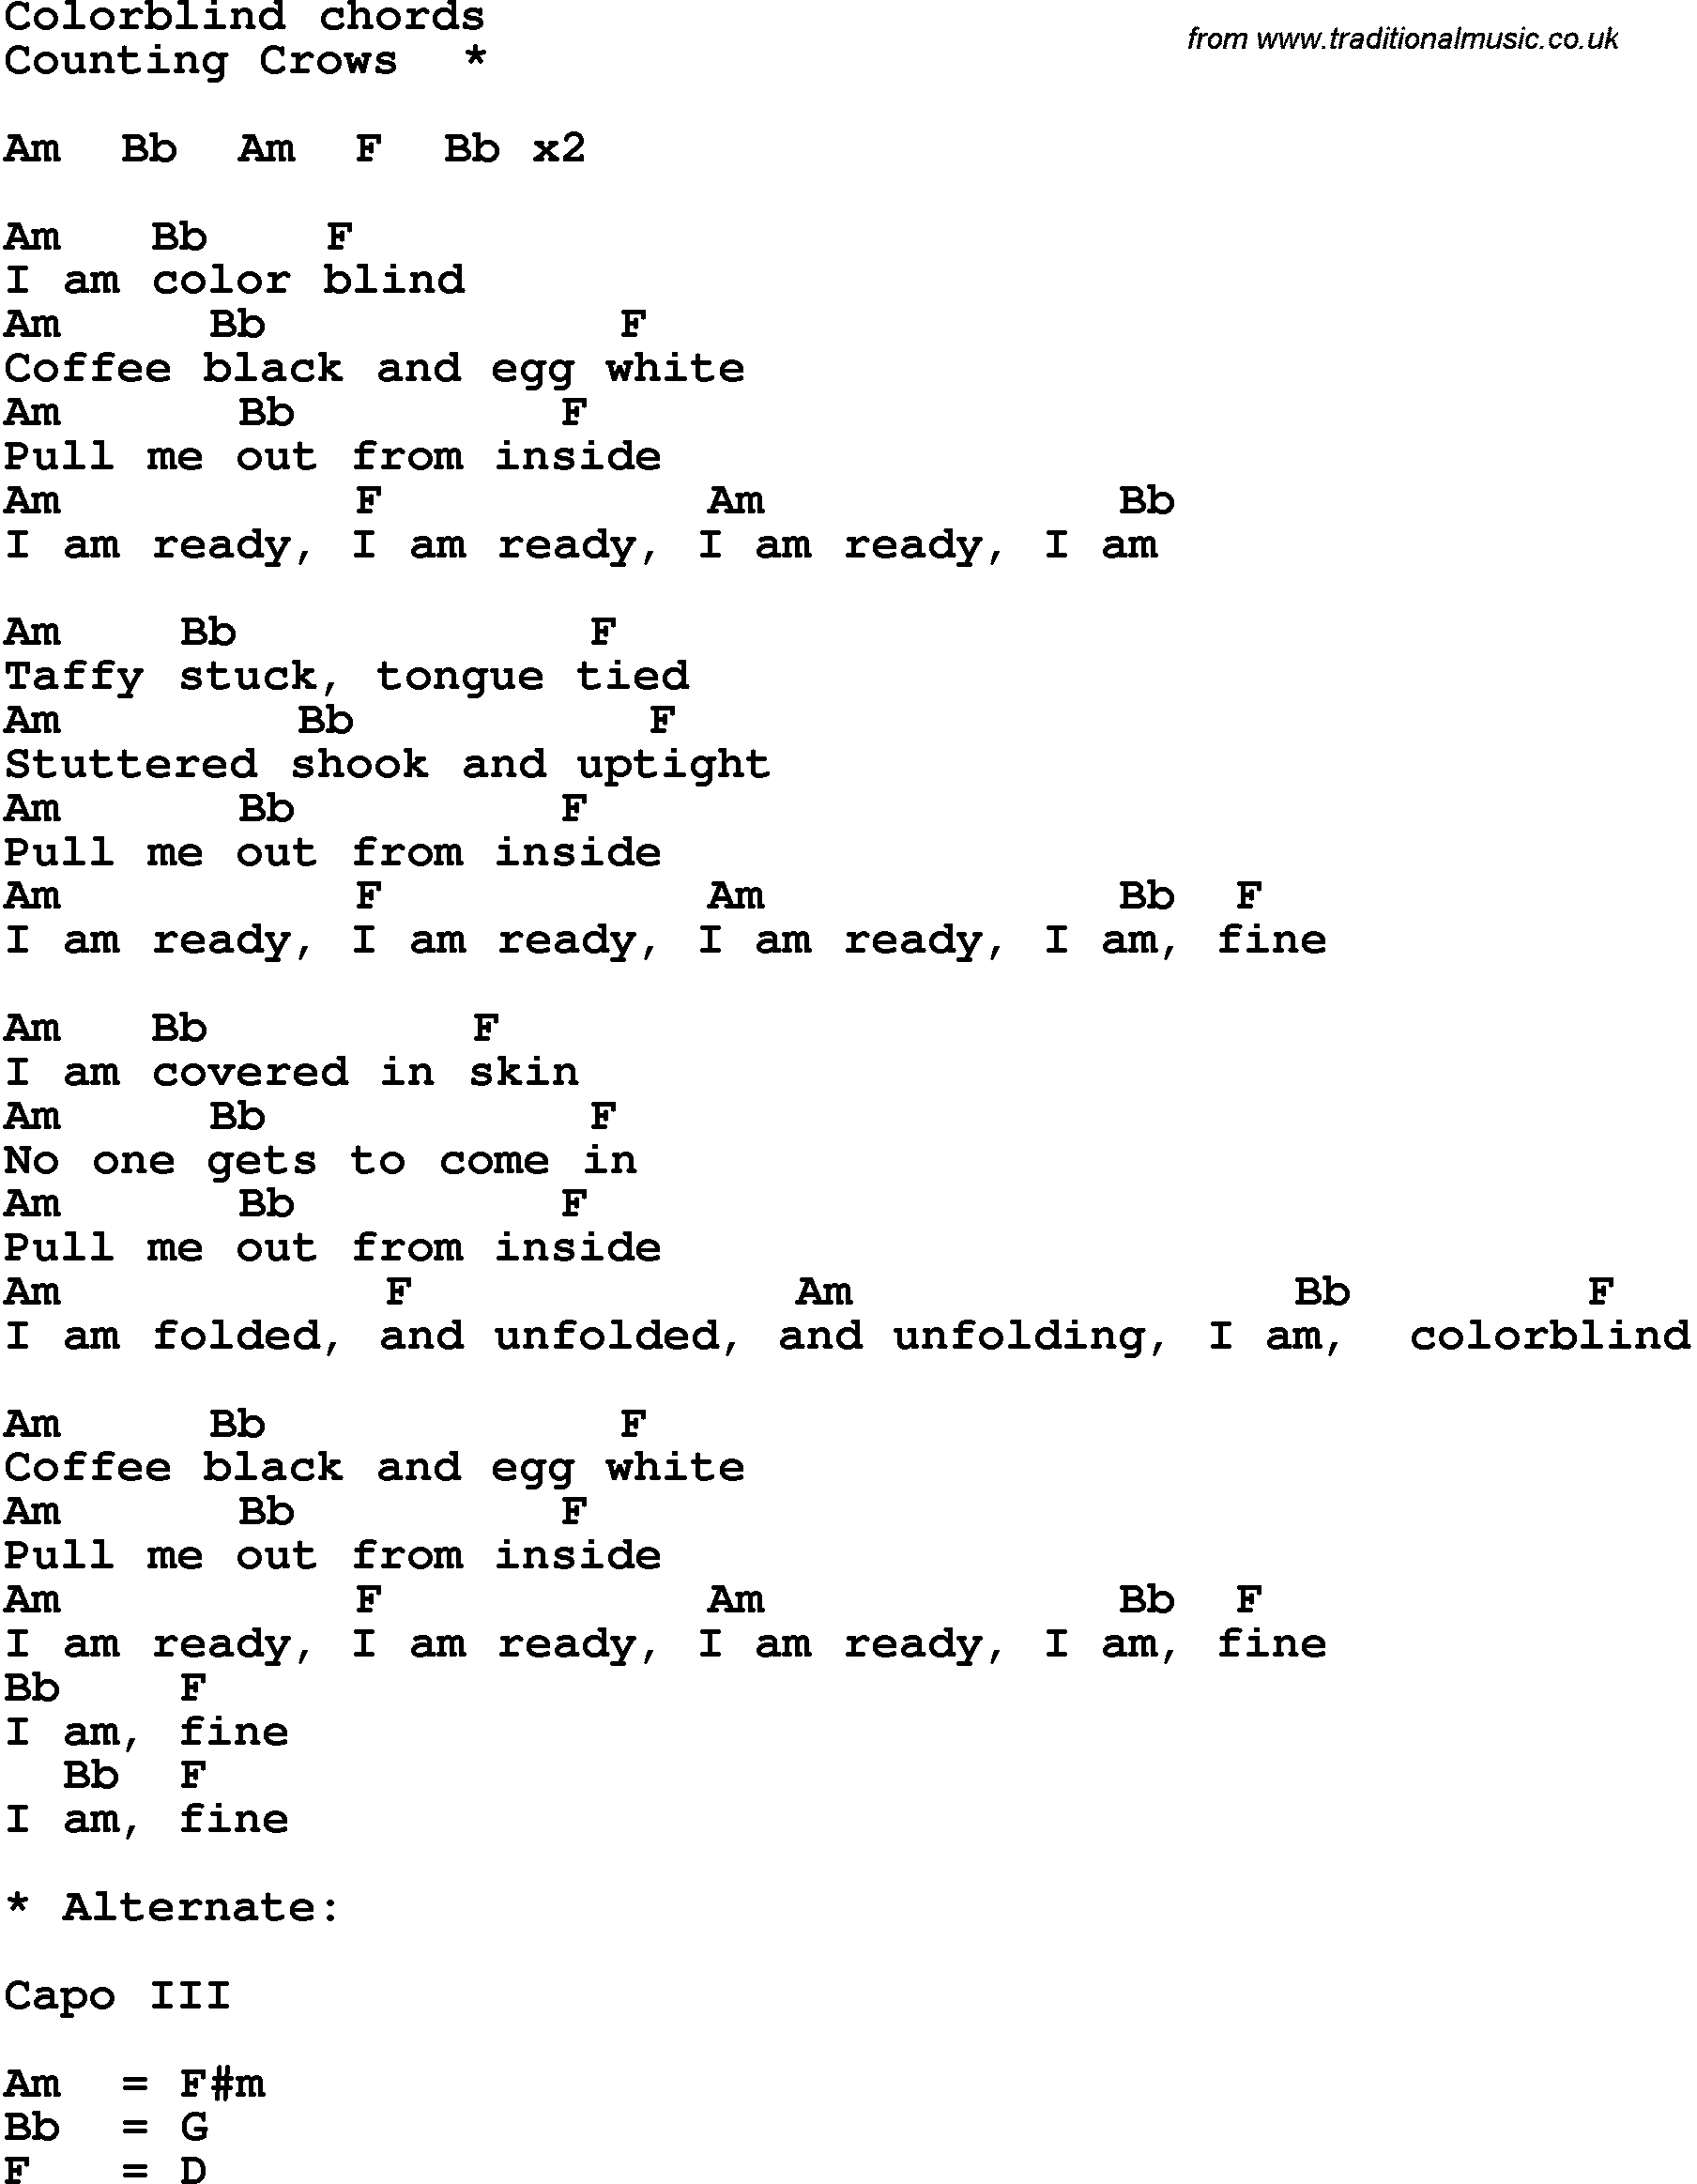 Song Lyrics with guitar chords for Colorblind